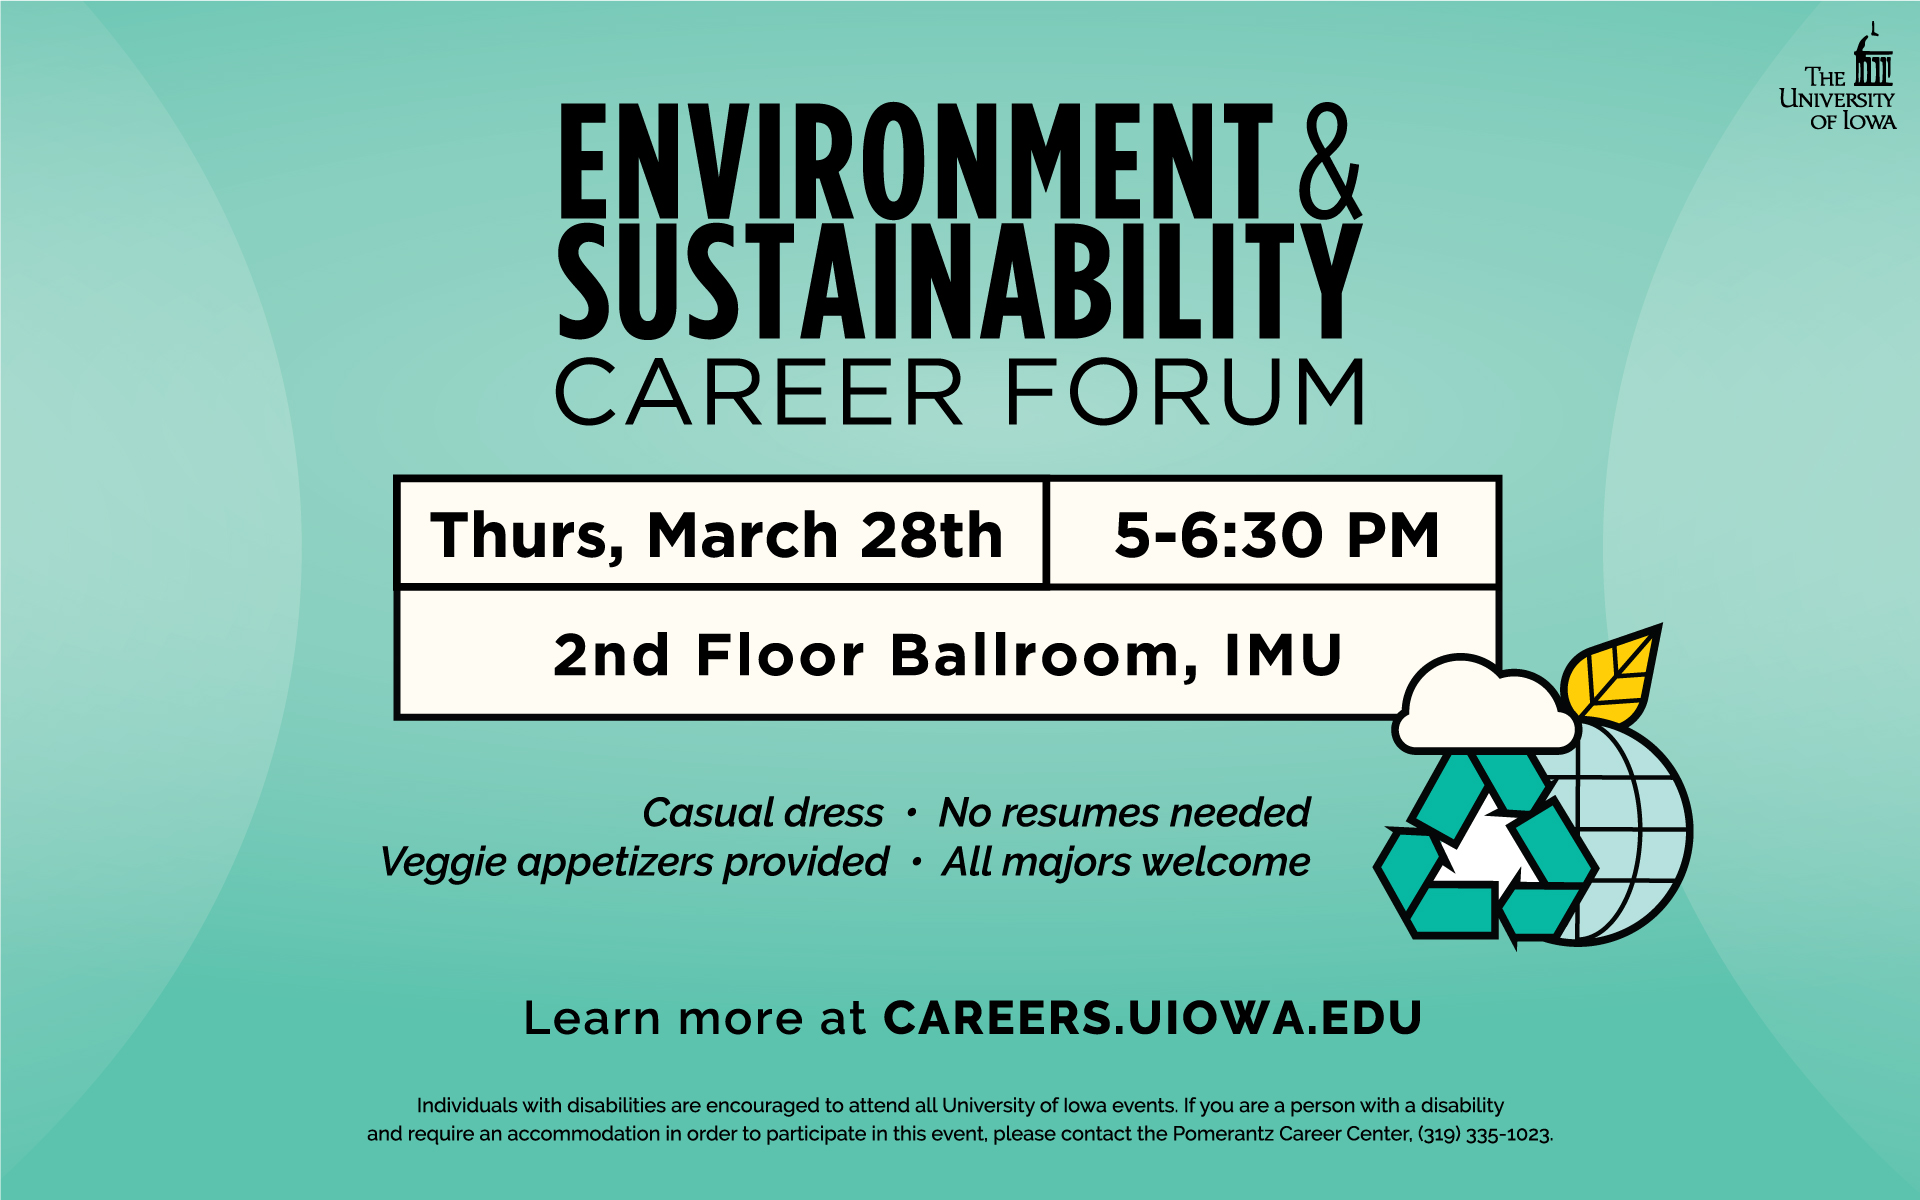 Environment & Sustainability Career Forum, March 28th, 5-6:30pm